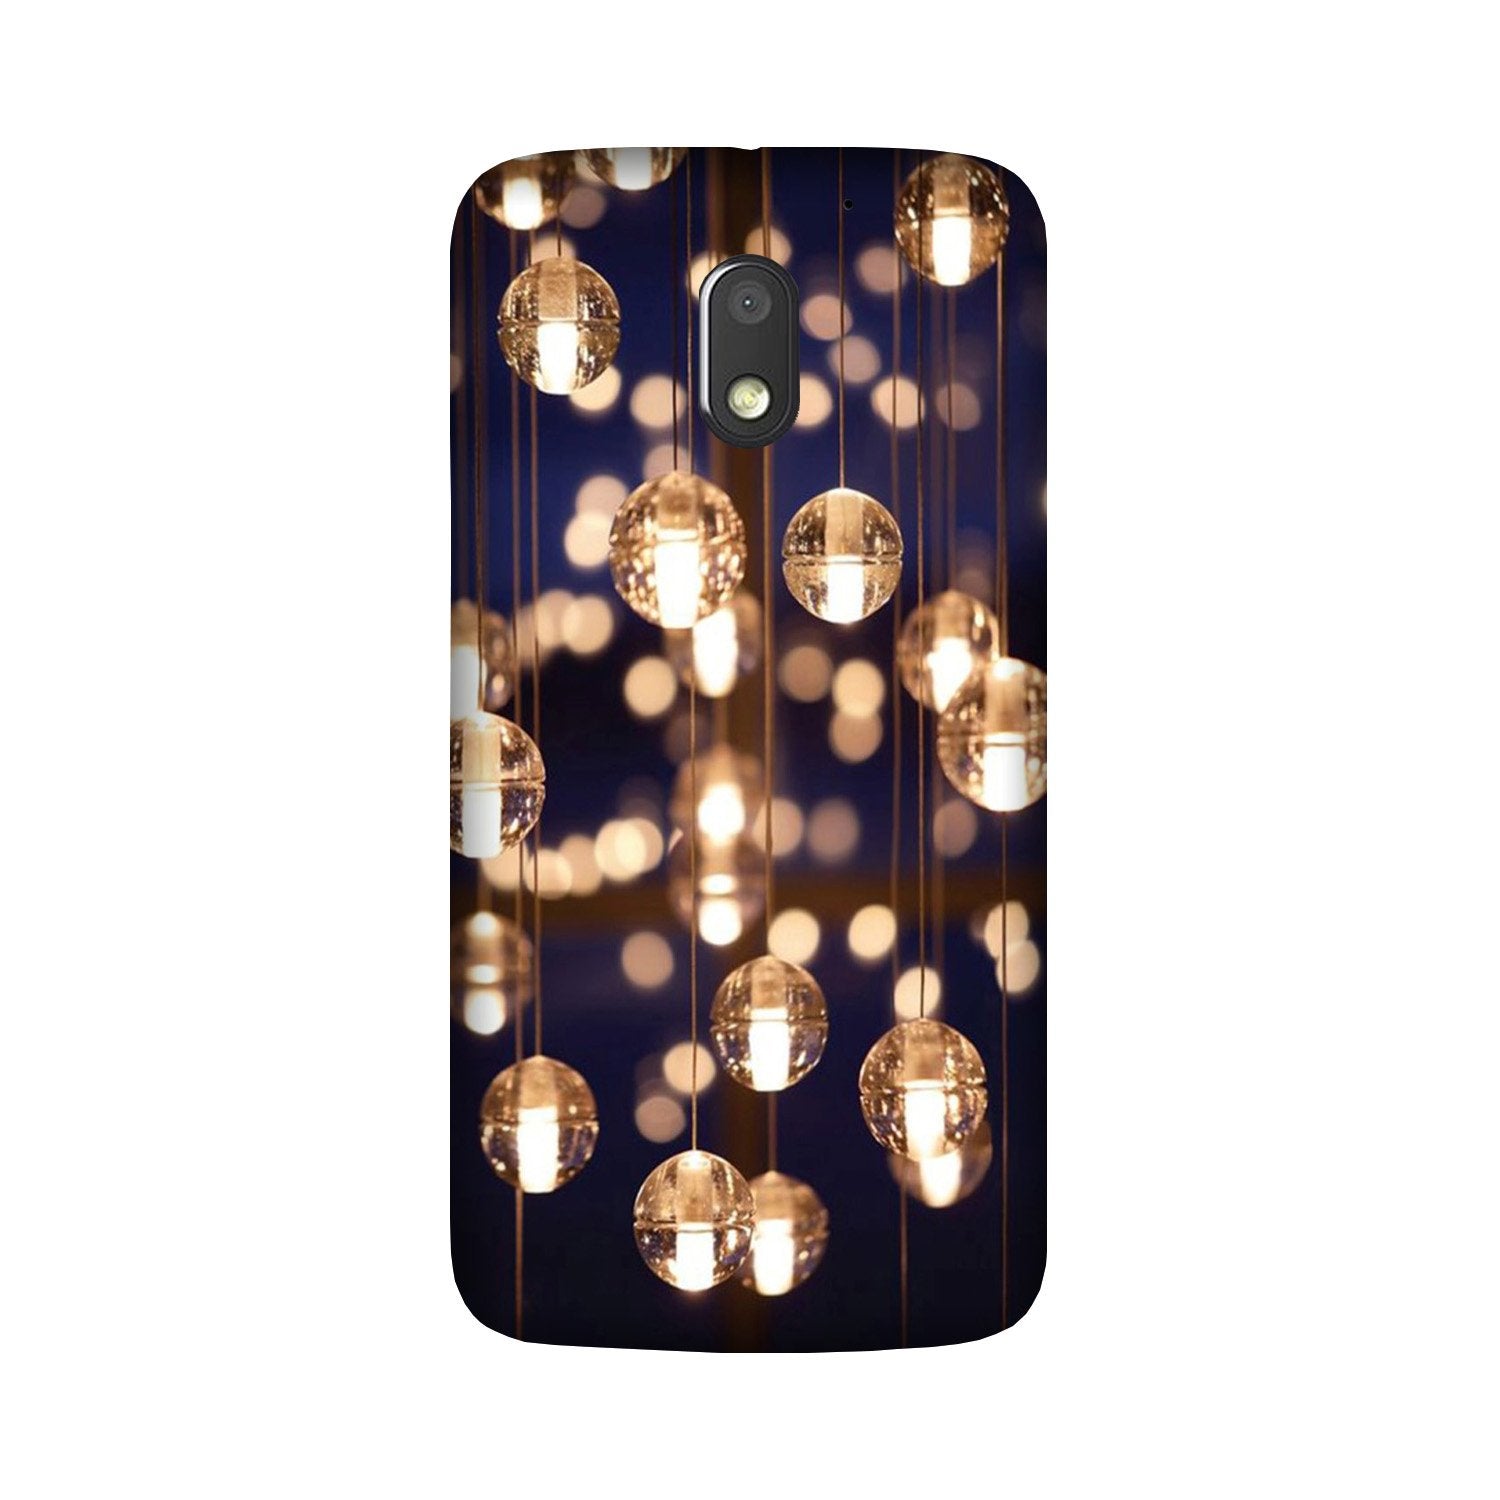 Party Bulb2 Case for Moto G4 Play